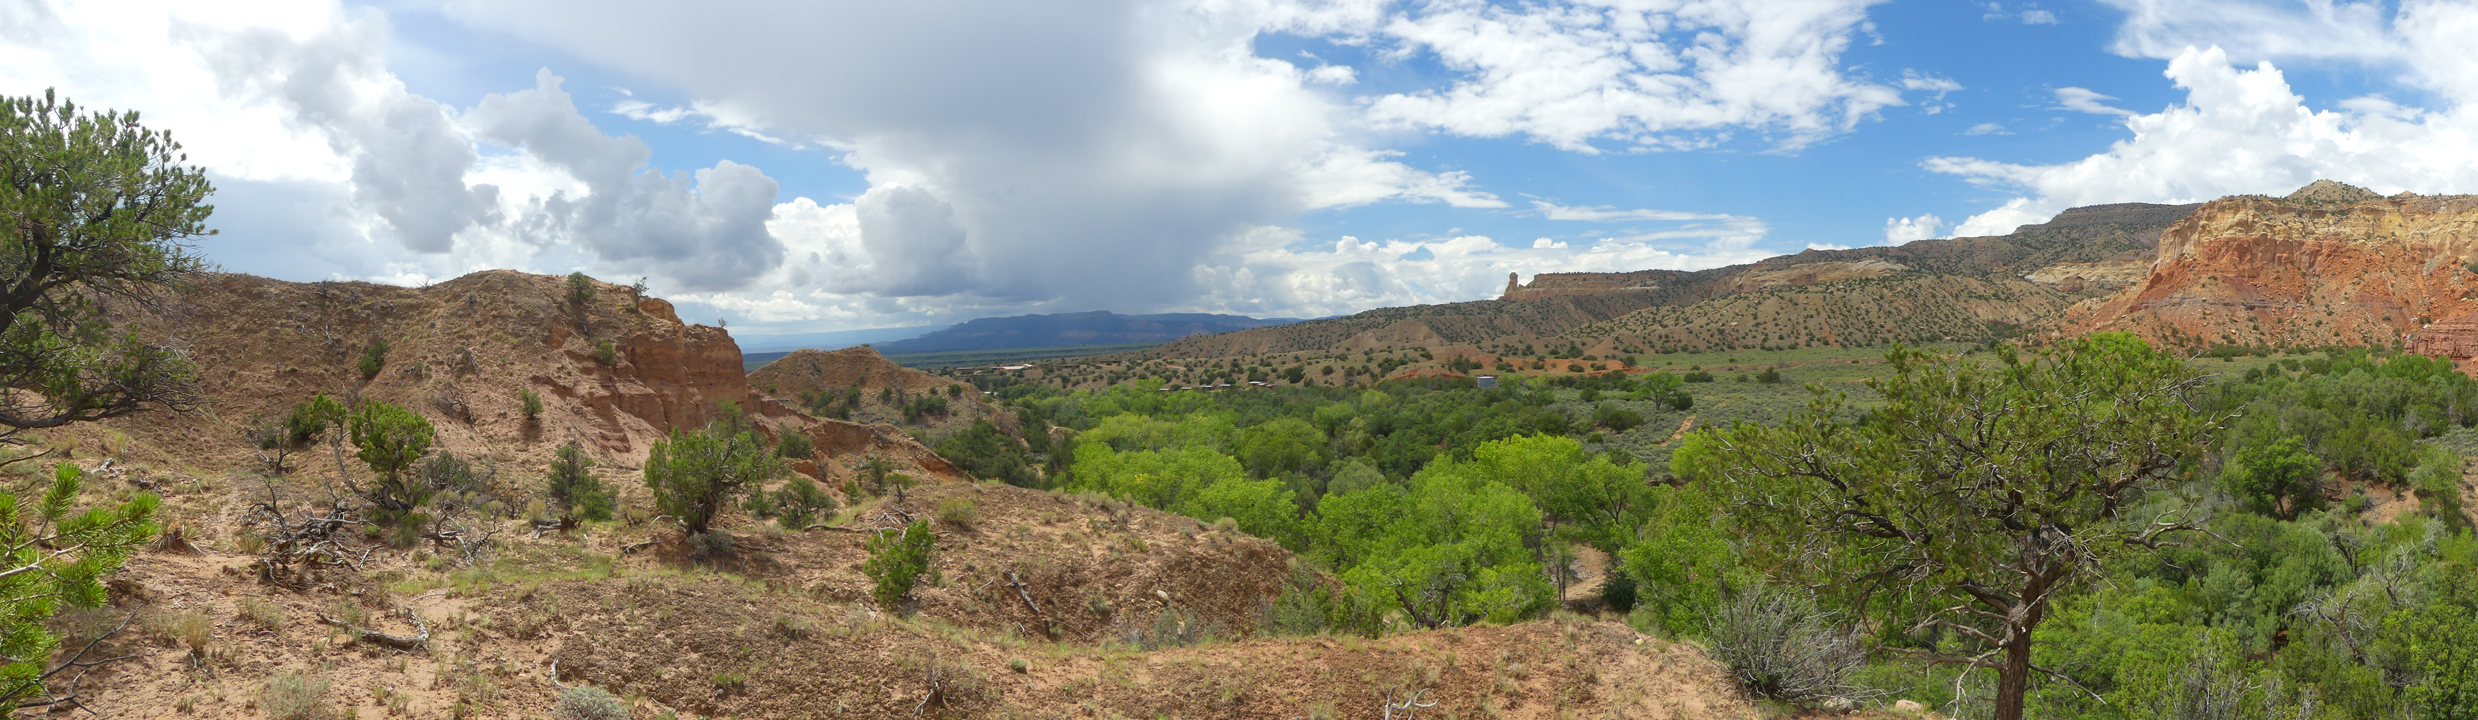 stormy sky over Ghost Ranch